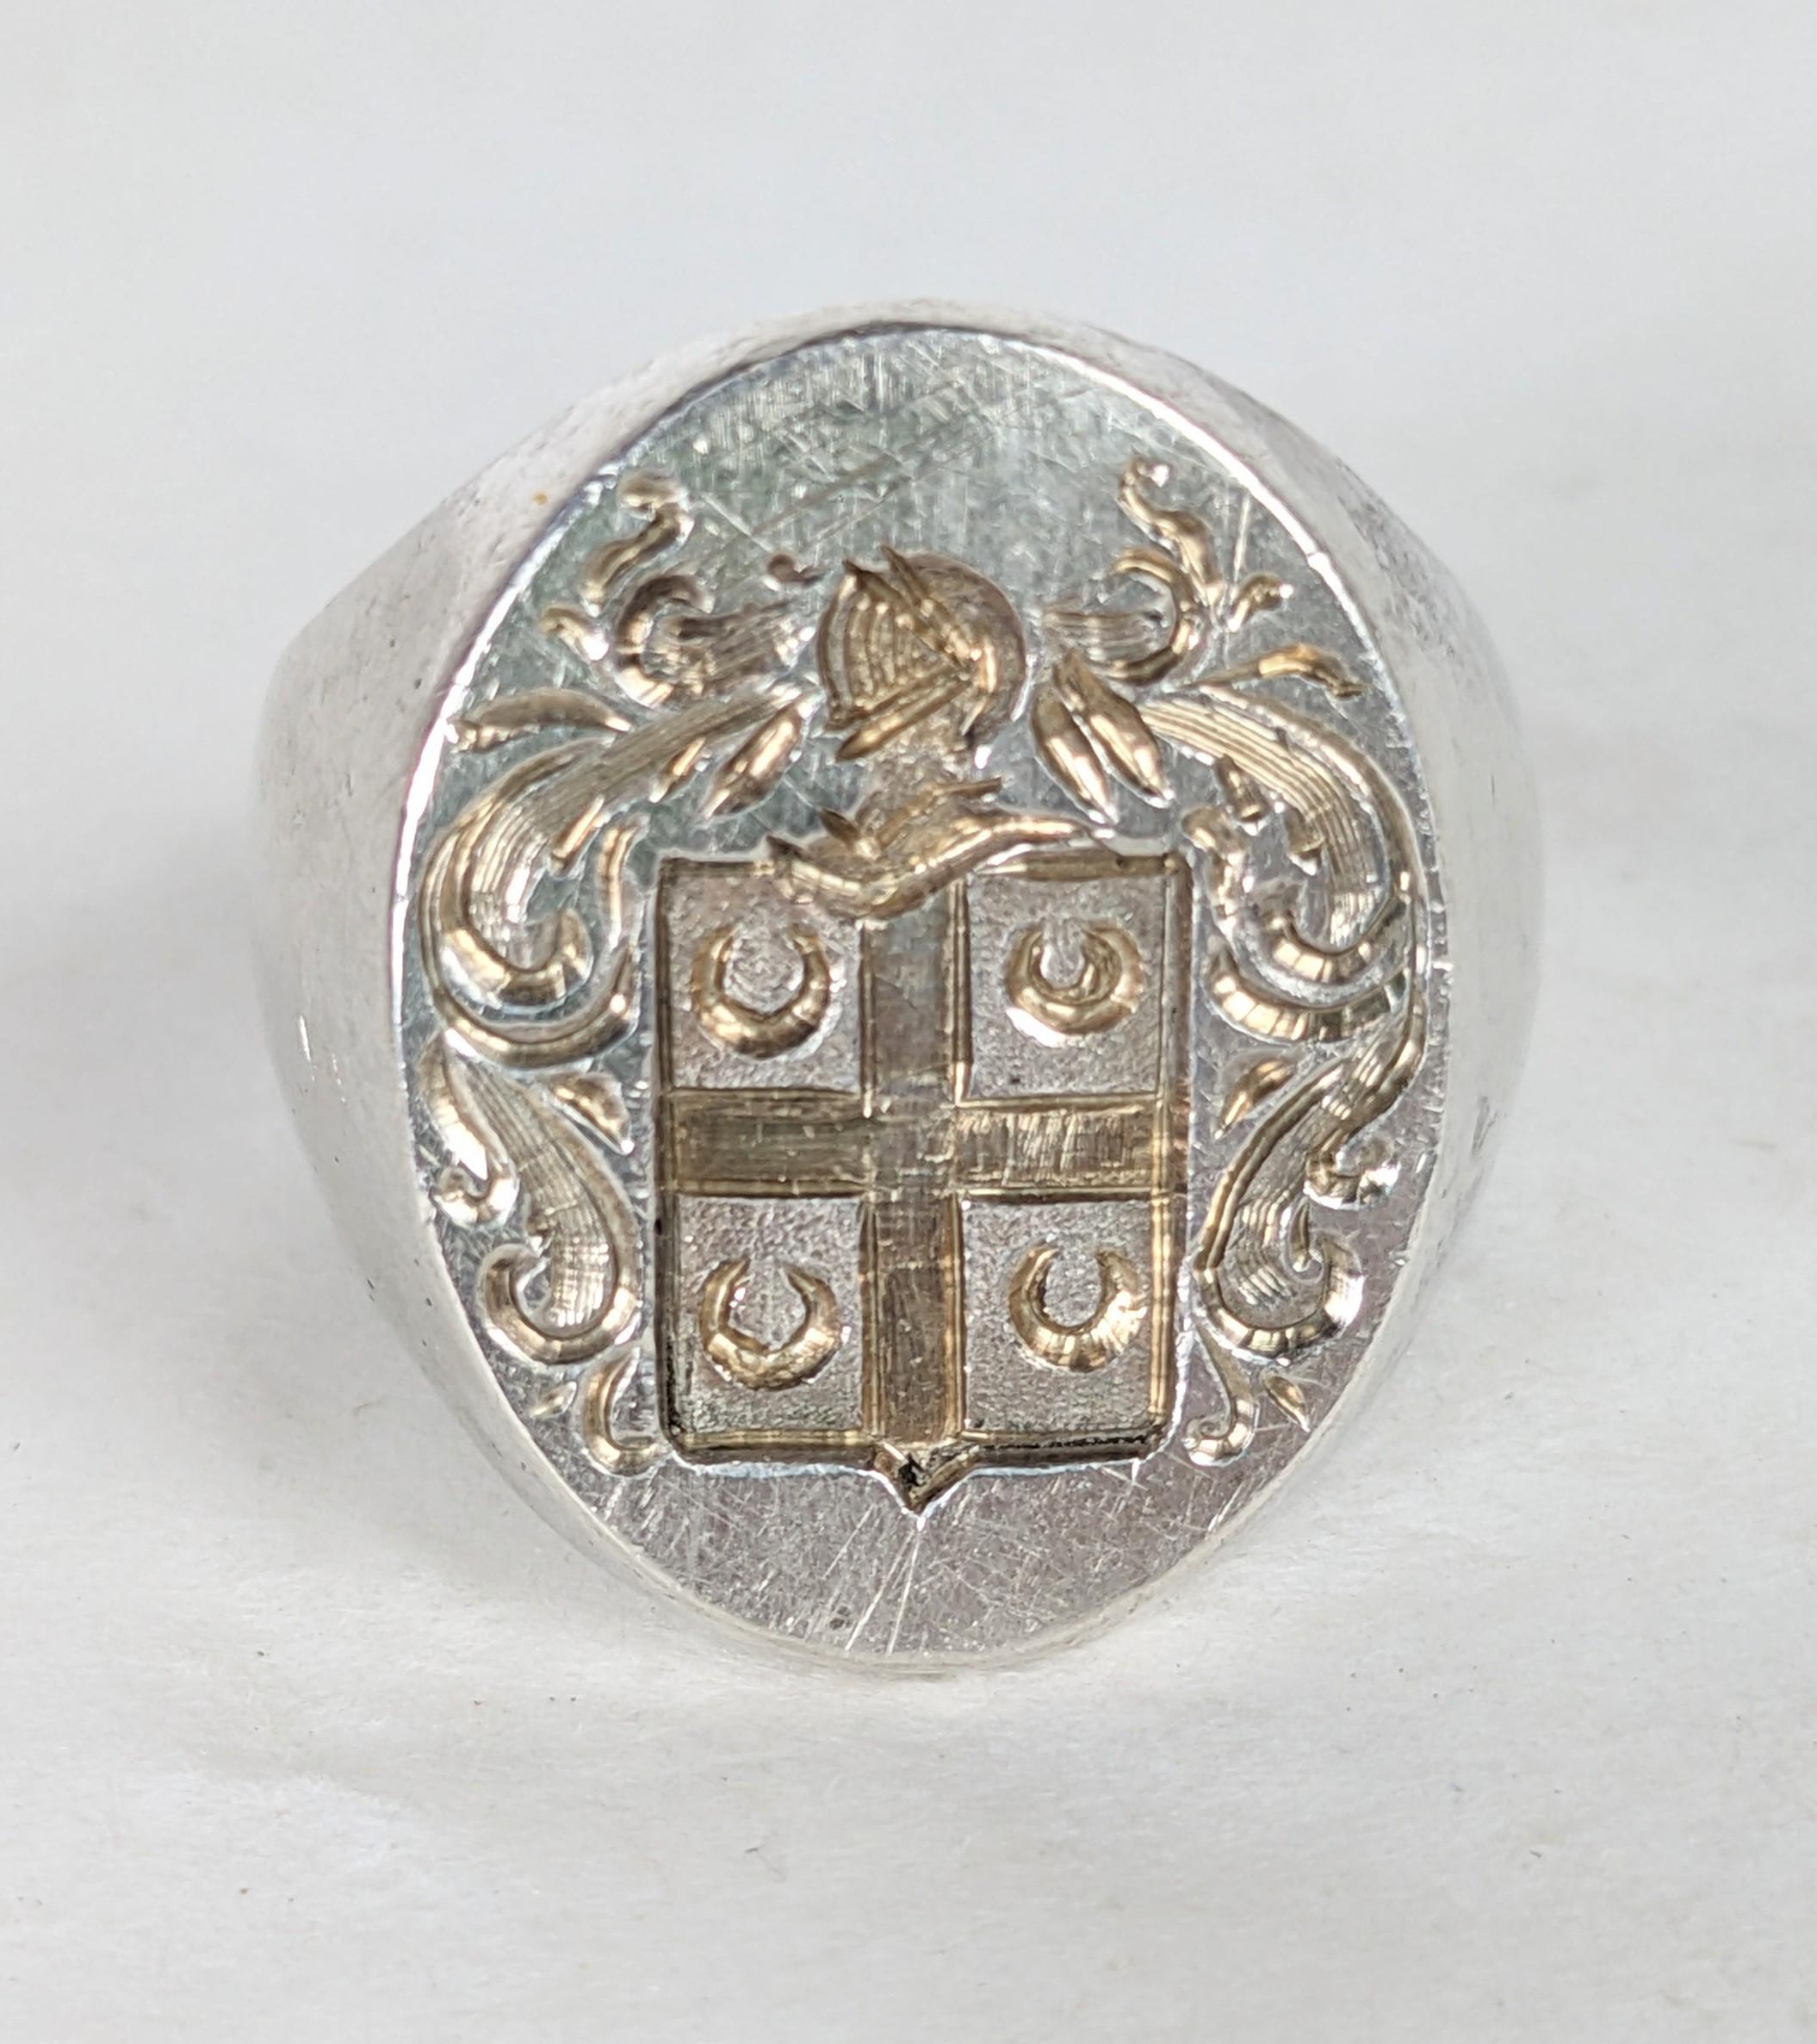 Massive Antique Sterling Signet Ring from the 1940's for instant old world vibes. Elegant armorial crest design which is crisp and unscratched. Super heavy quality sterling shank. Large imposing face measures 7/8